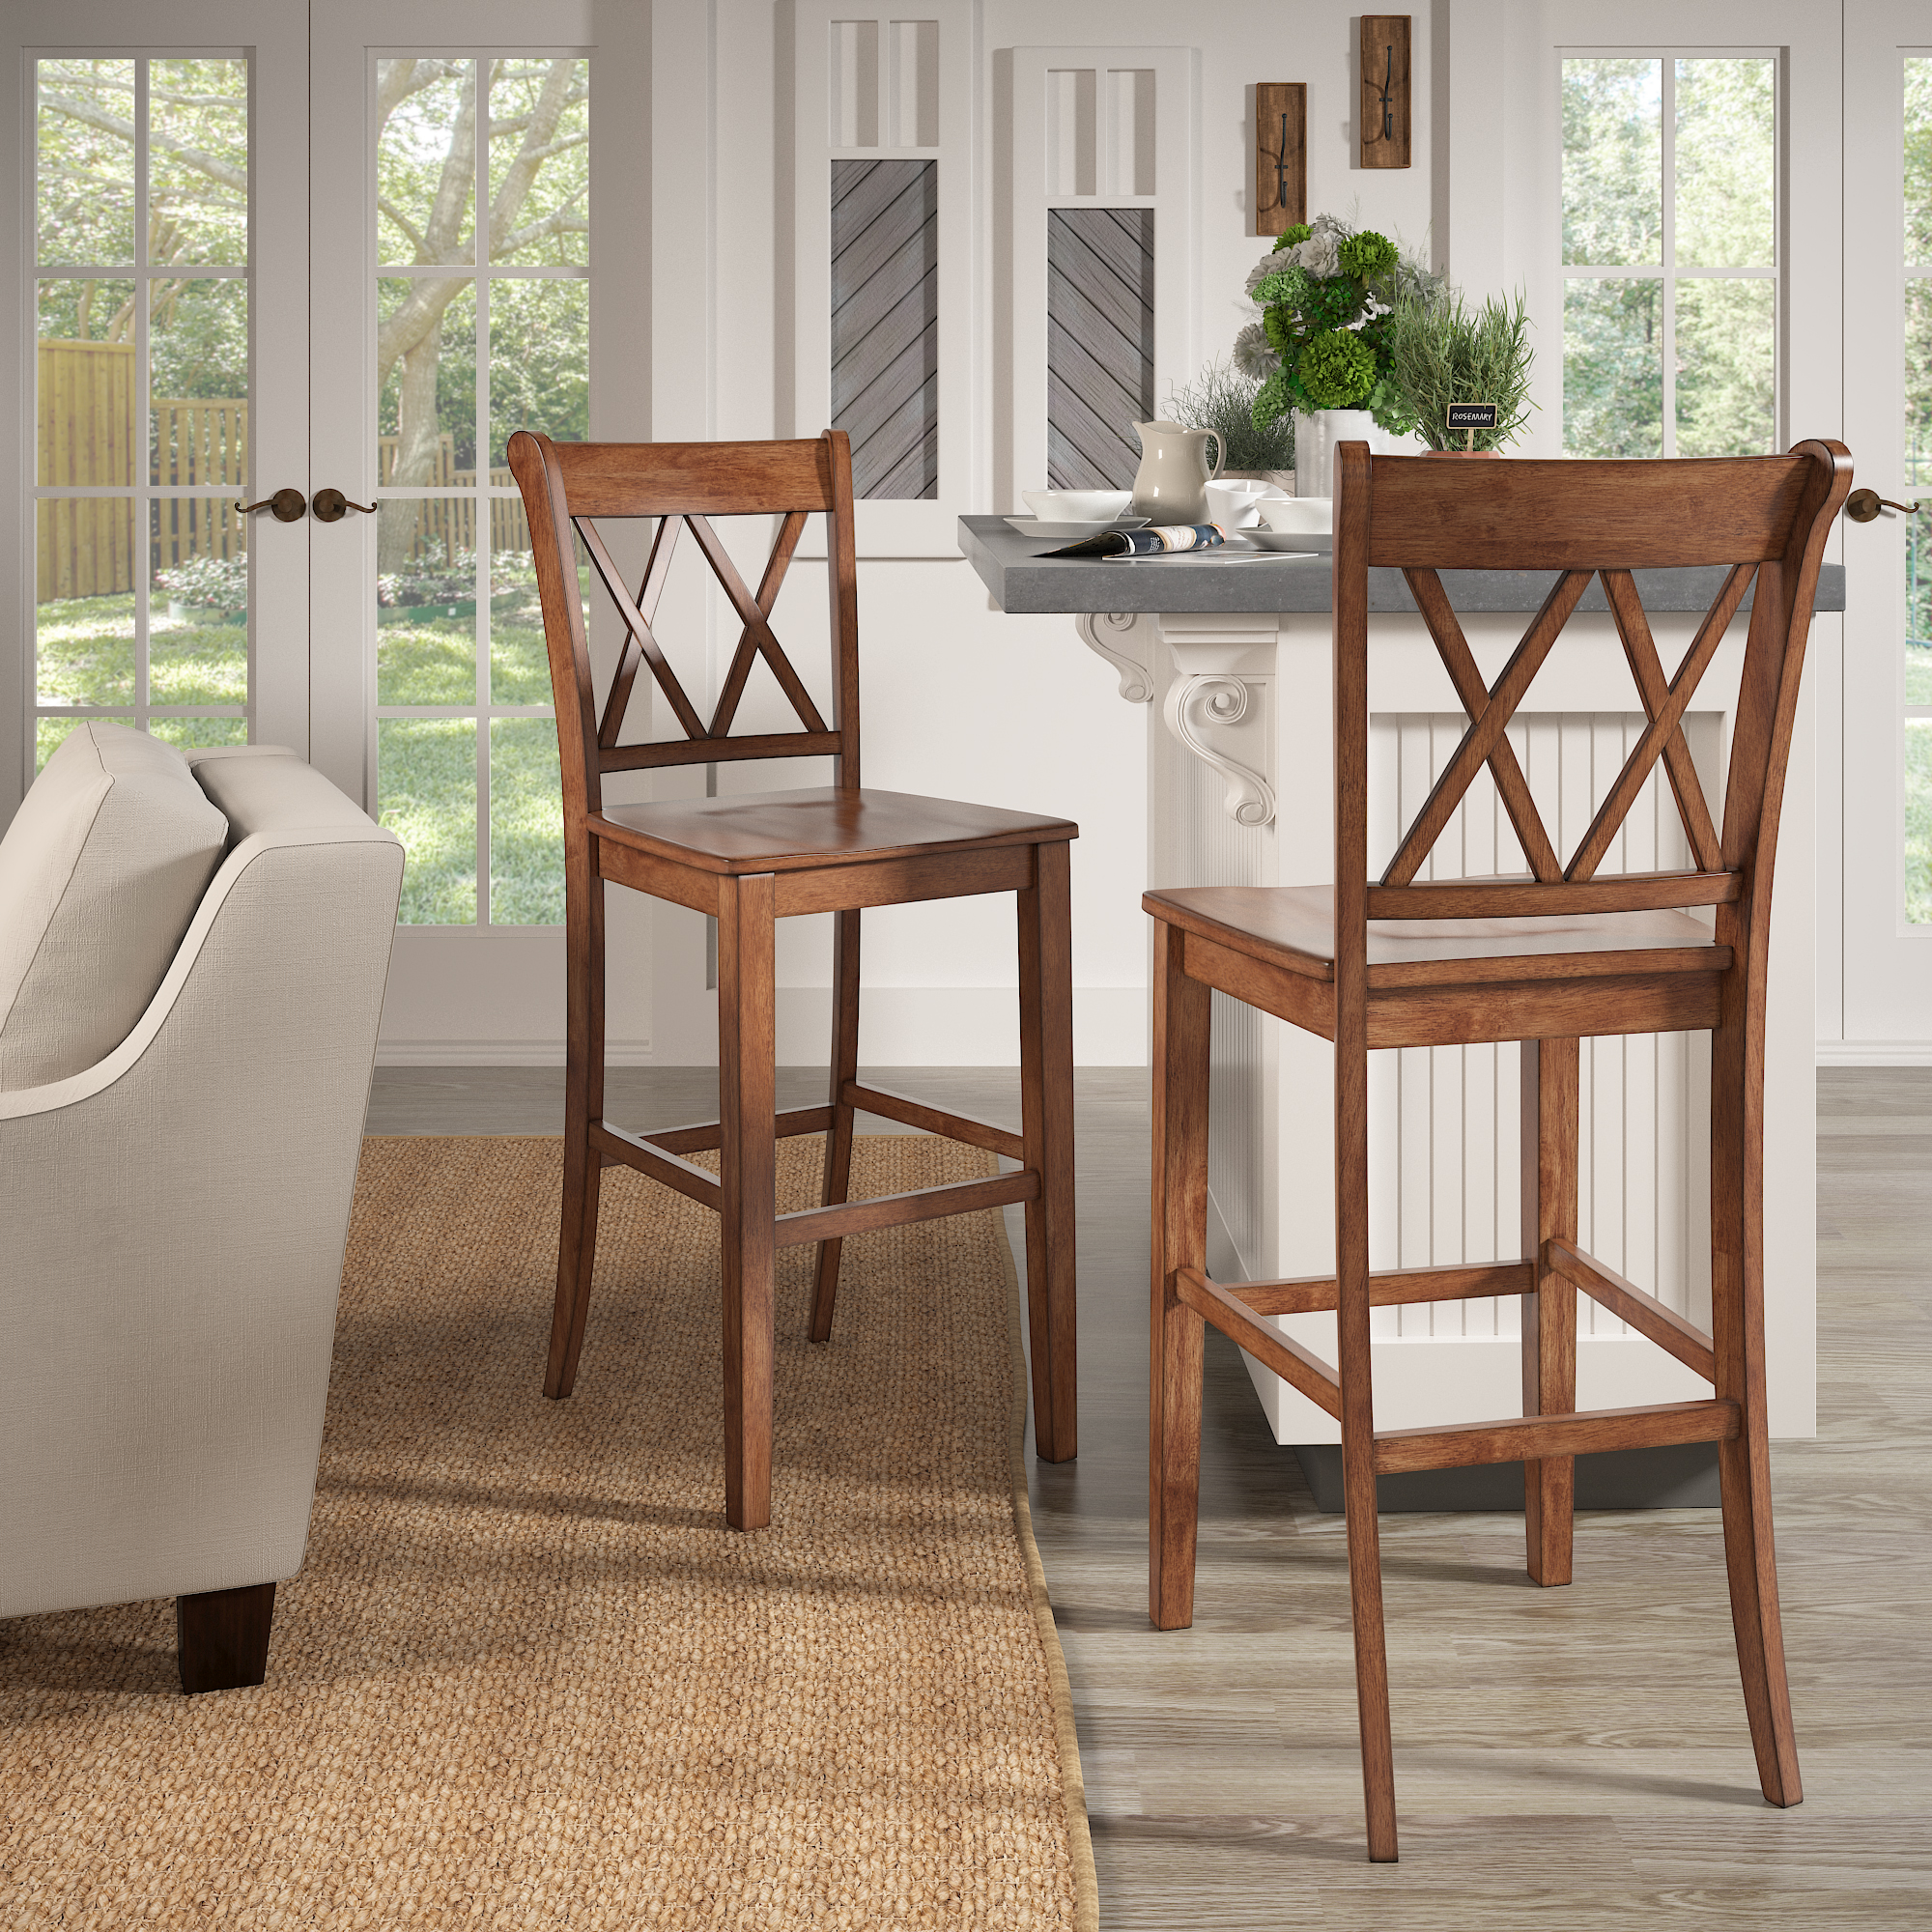 X-Back Bar Height Chairs (Set of 2)